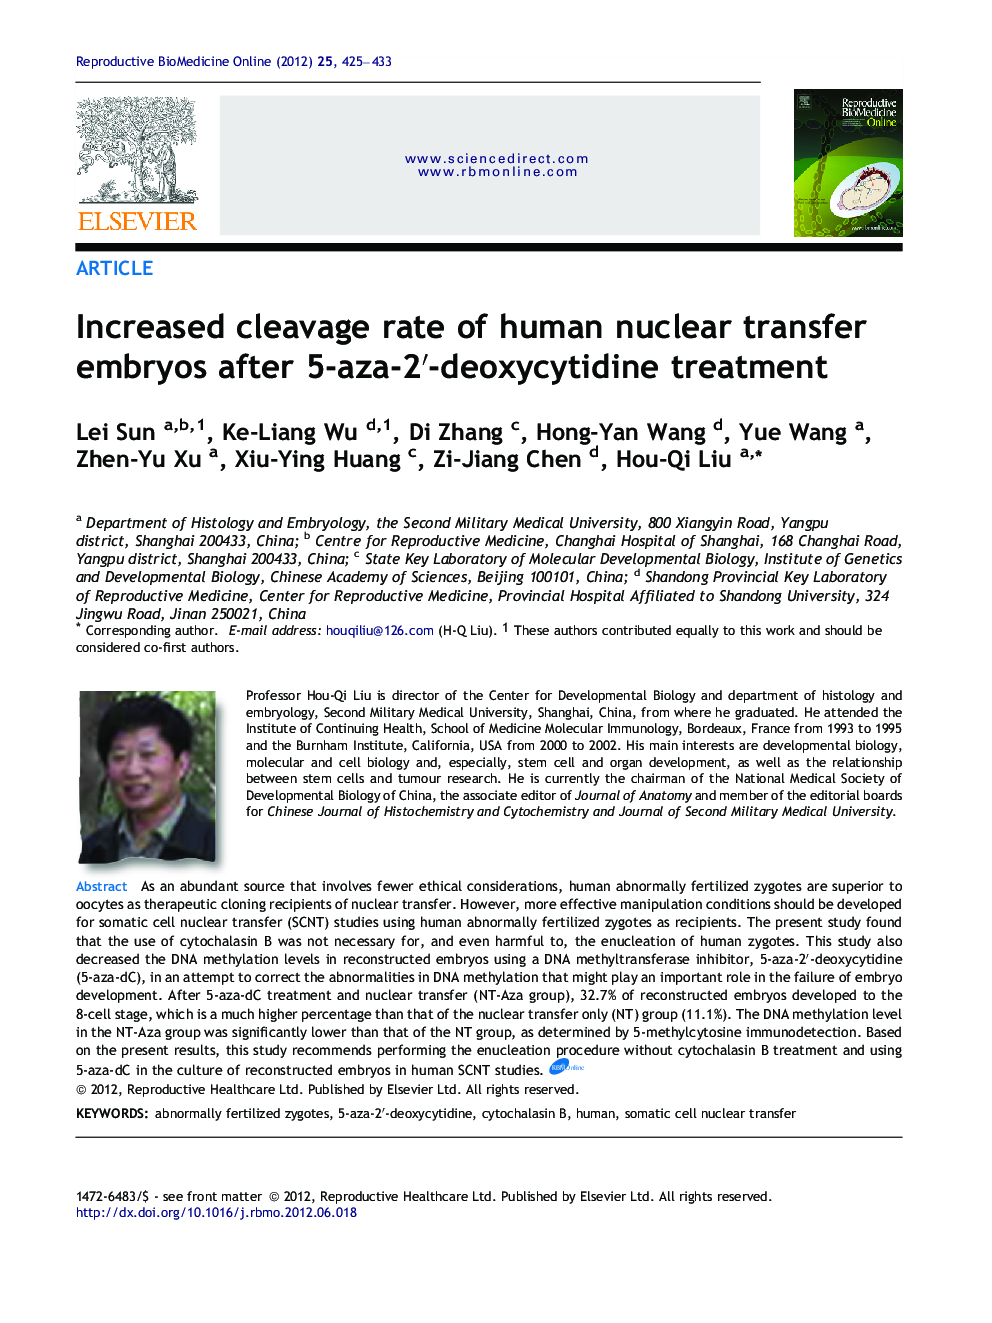 Increased cleavage rate of human nuclear transfer embryos after 5-aza-2′-deoxycytidine treatment 